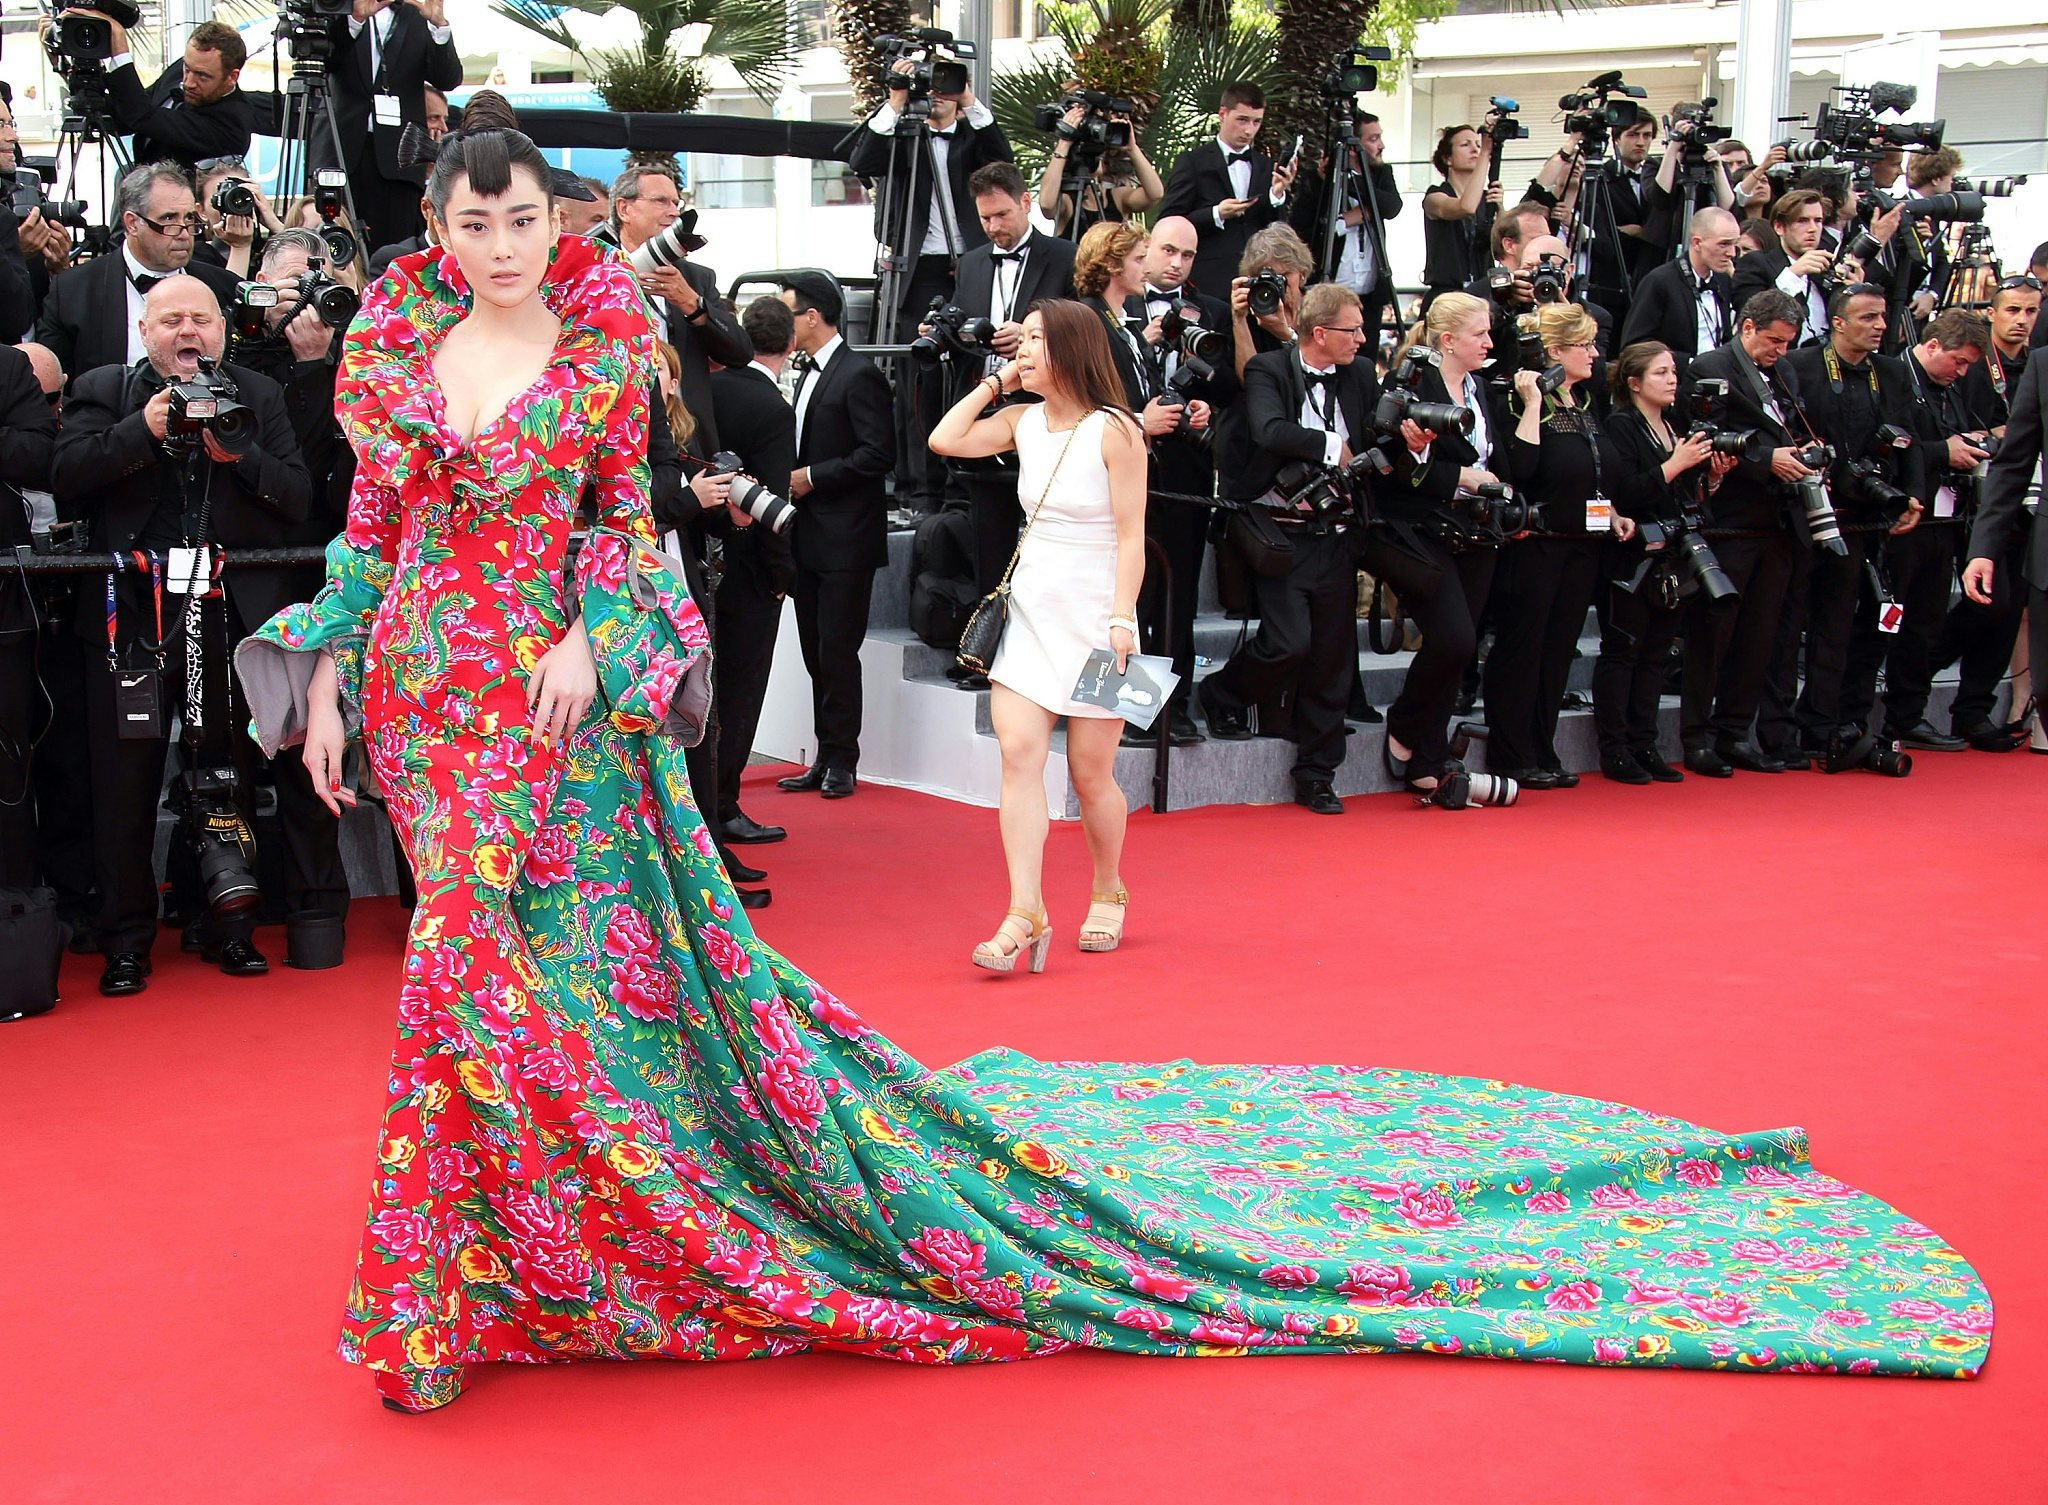 Chinese actress Zhang Xinyu attends the opening ceremony and premiere of "La Tete Haute ("Standing Tall") during the 68th annual Cannes Film Festival on May 13, 2015 in Cannes, France.